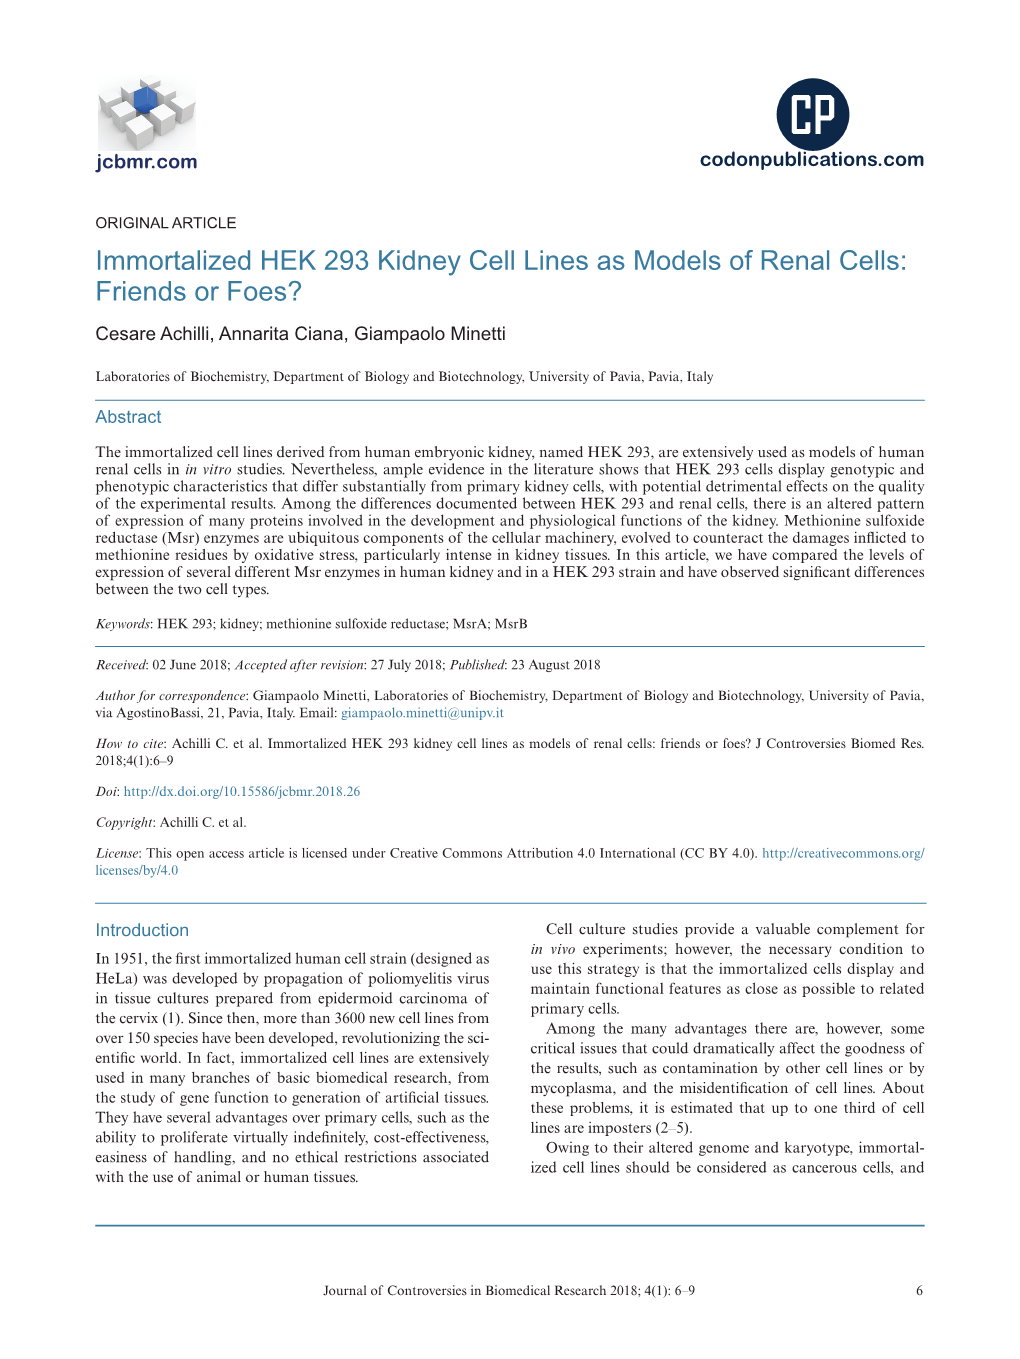 Immortalized HEK 293 Kidney Cell Lines As Models of Renal Cells: Friends Or Foes? Cesare Achilli, Annarita Ciana, Giampaolo Minetti